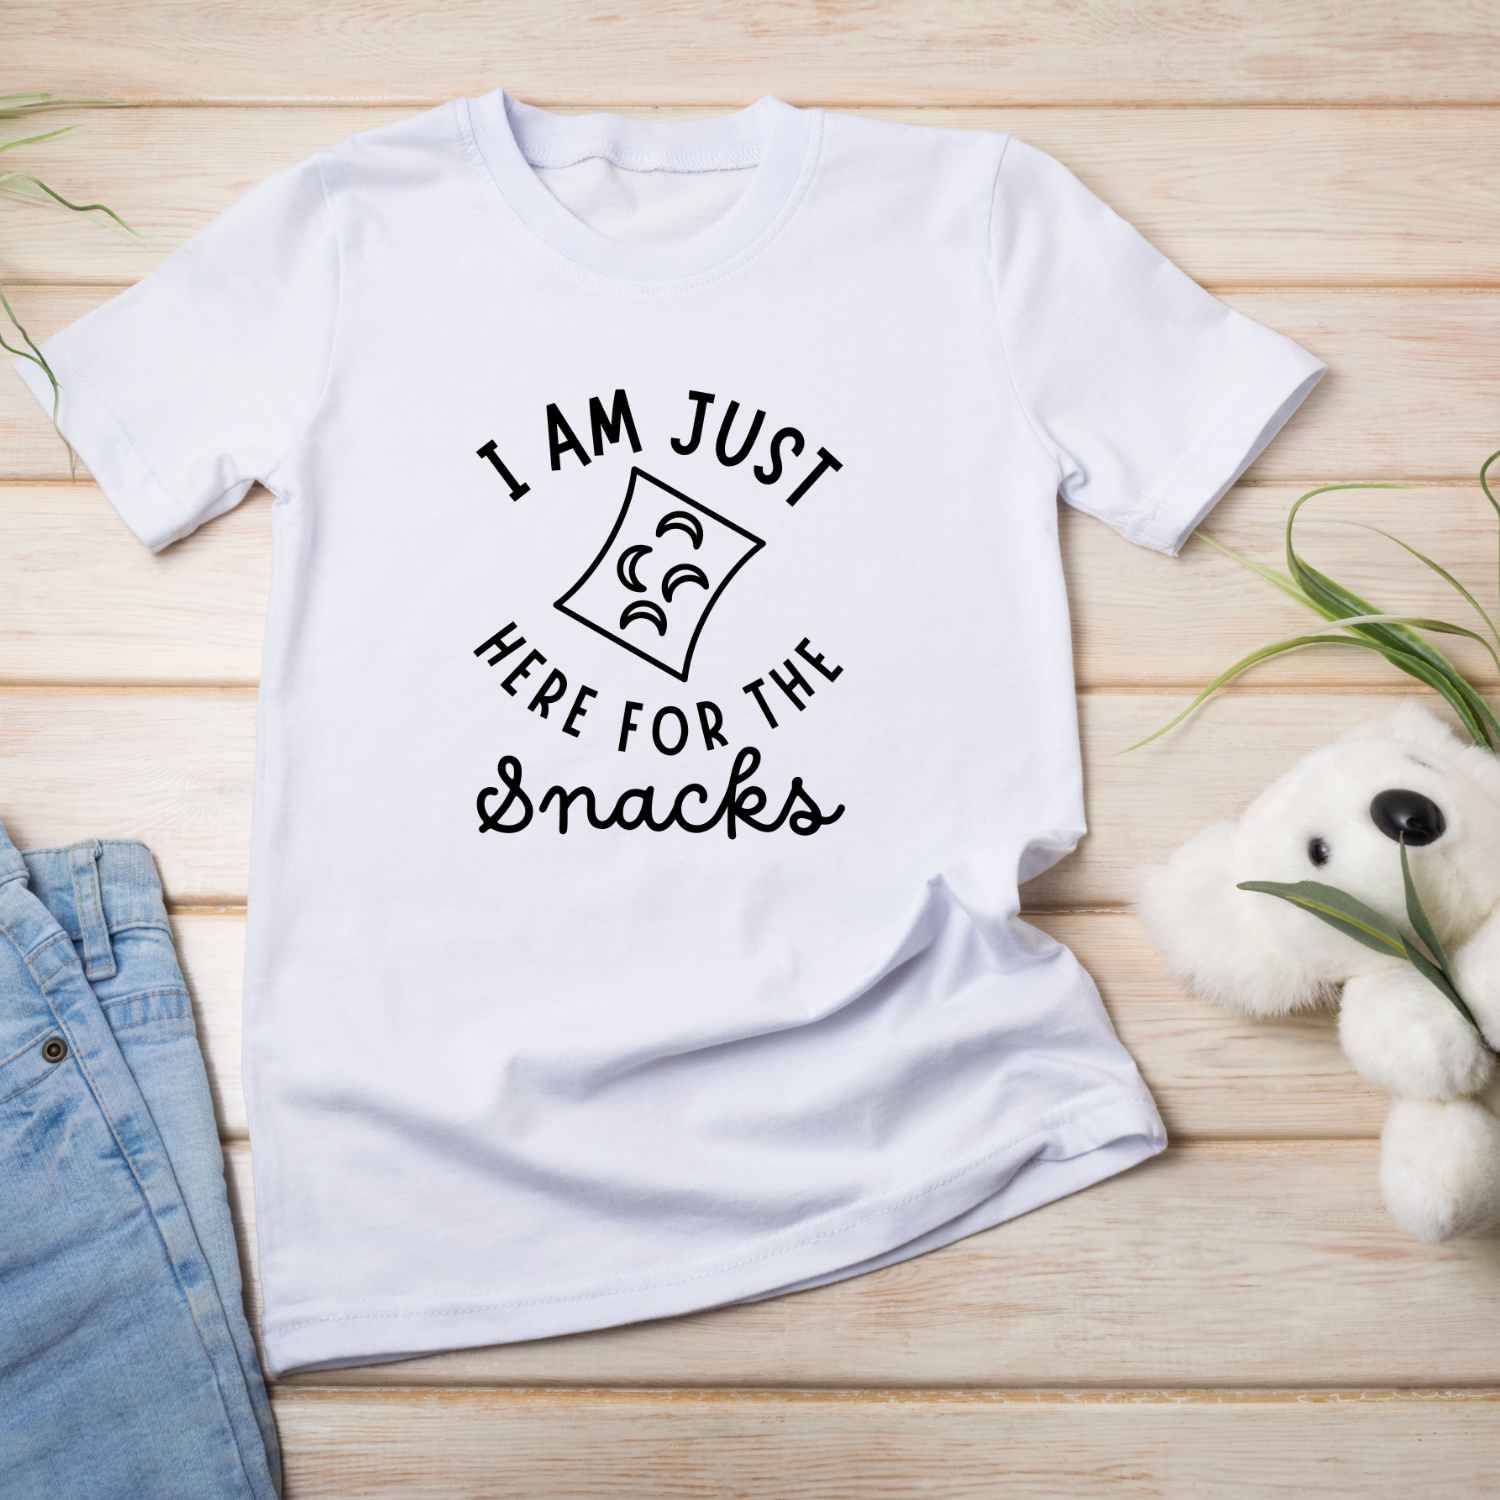 I am just here for the Snacks T-shirt Design